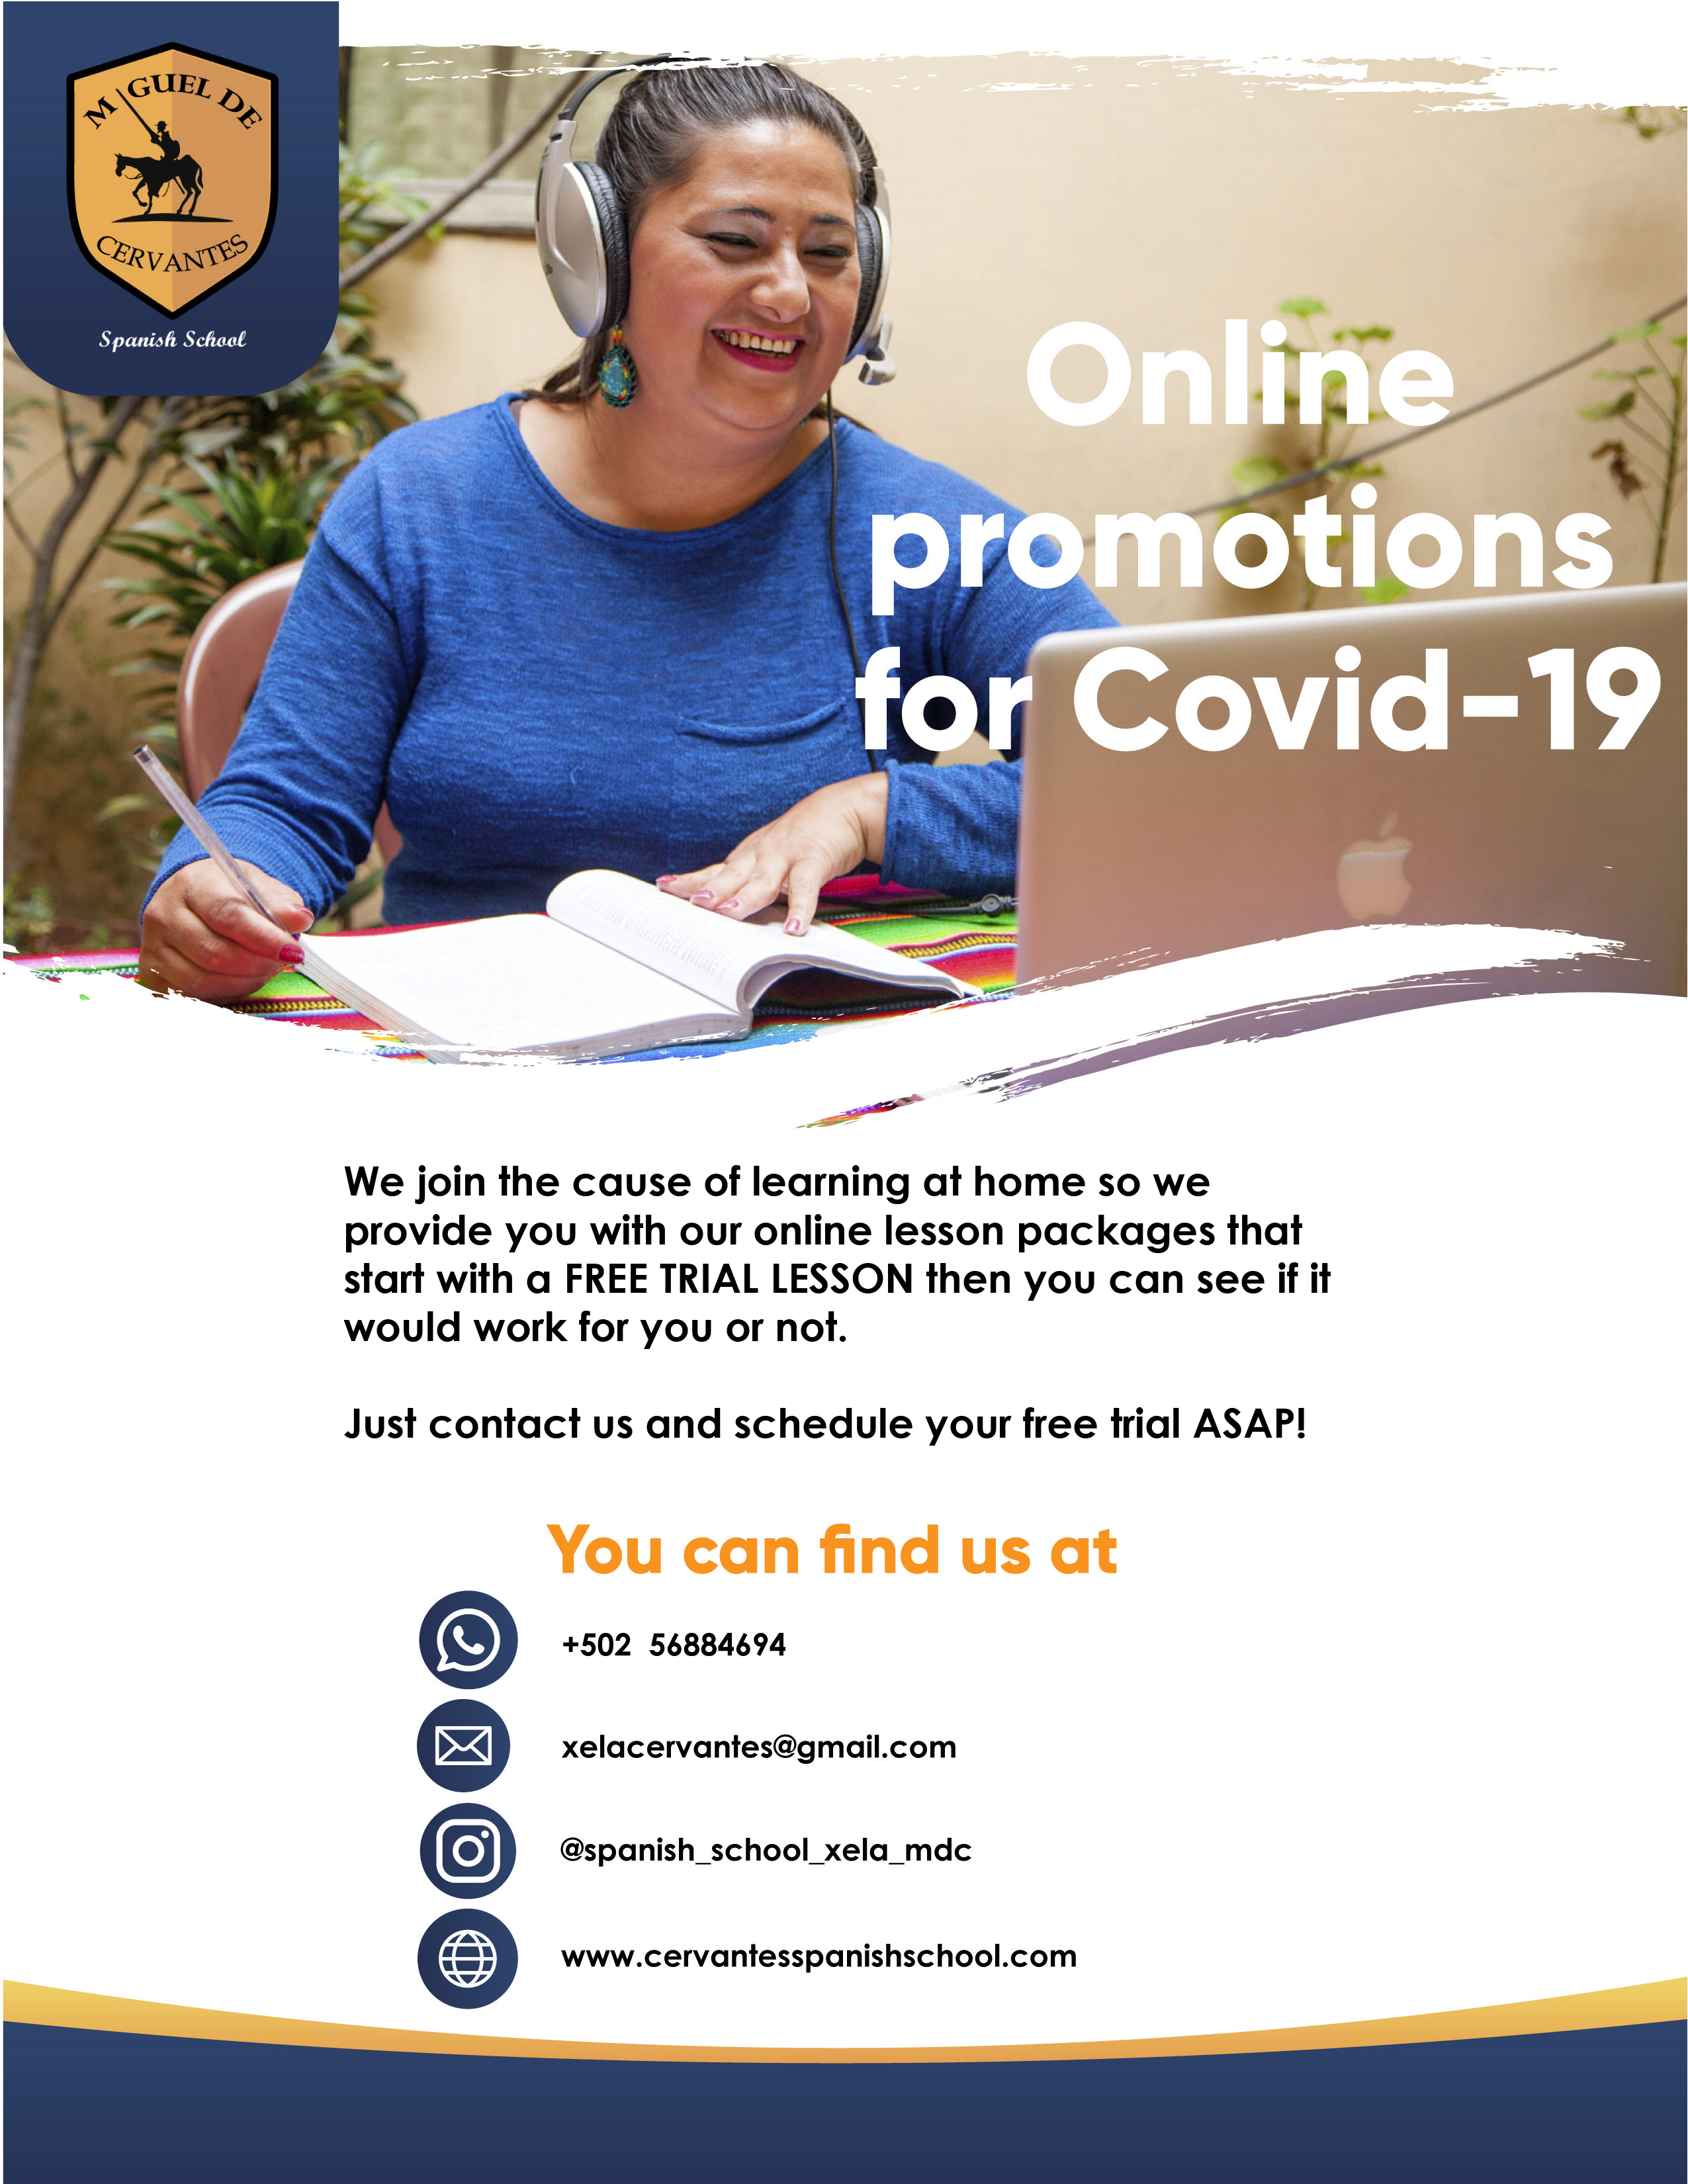 Online promotions for COVID-19